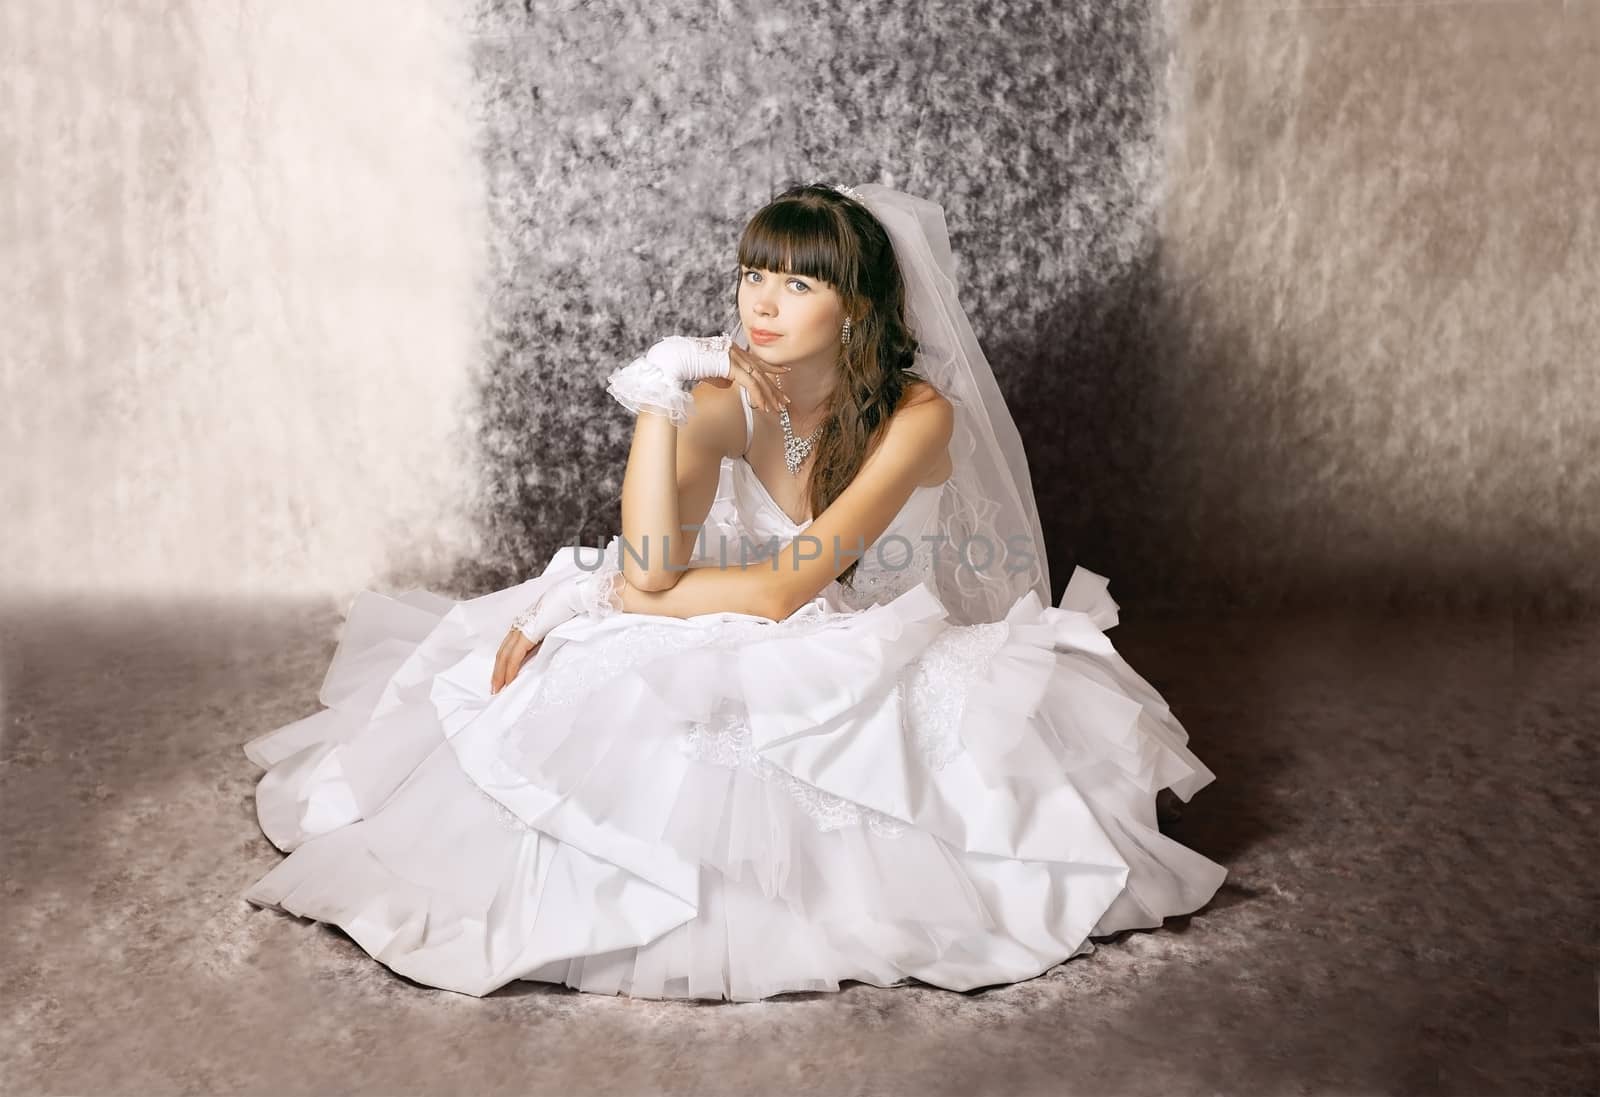 The bride with a thoughtful expression on his face in a wedding dress in a sitting position